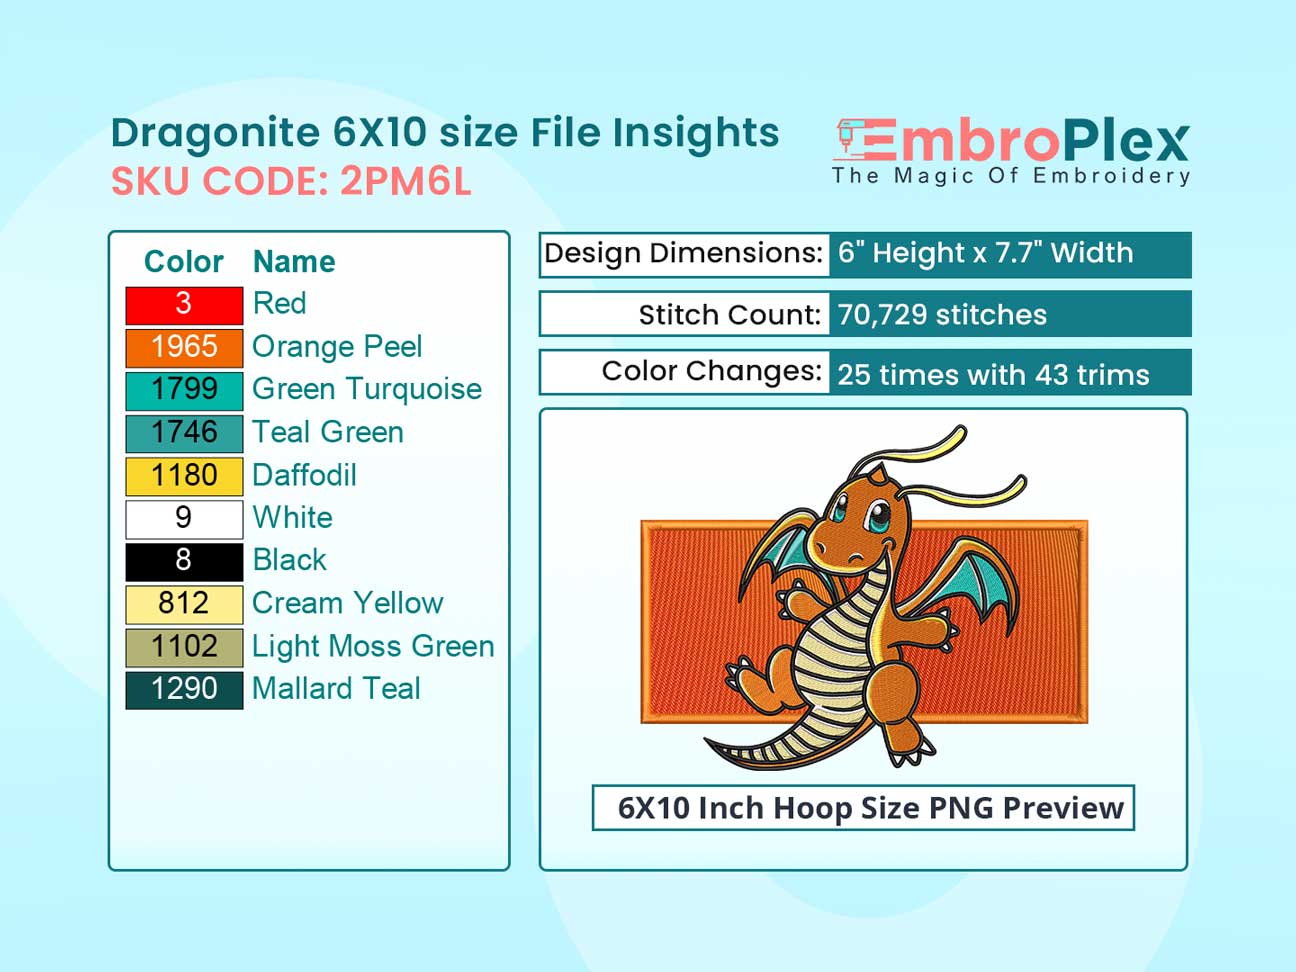 Anime-Inspired Dragonite Embroidery Design File - 6x10 Inch hoop Size Variation overview image